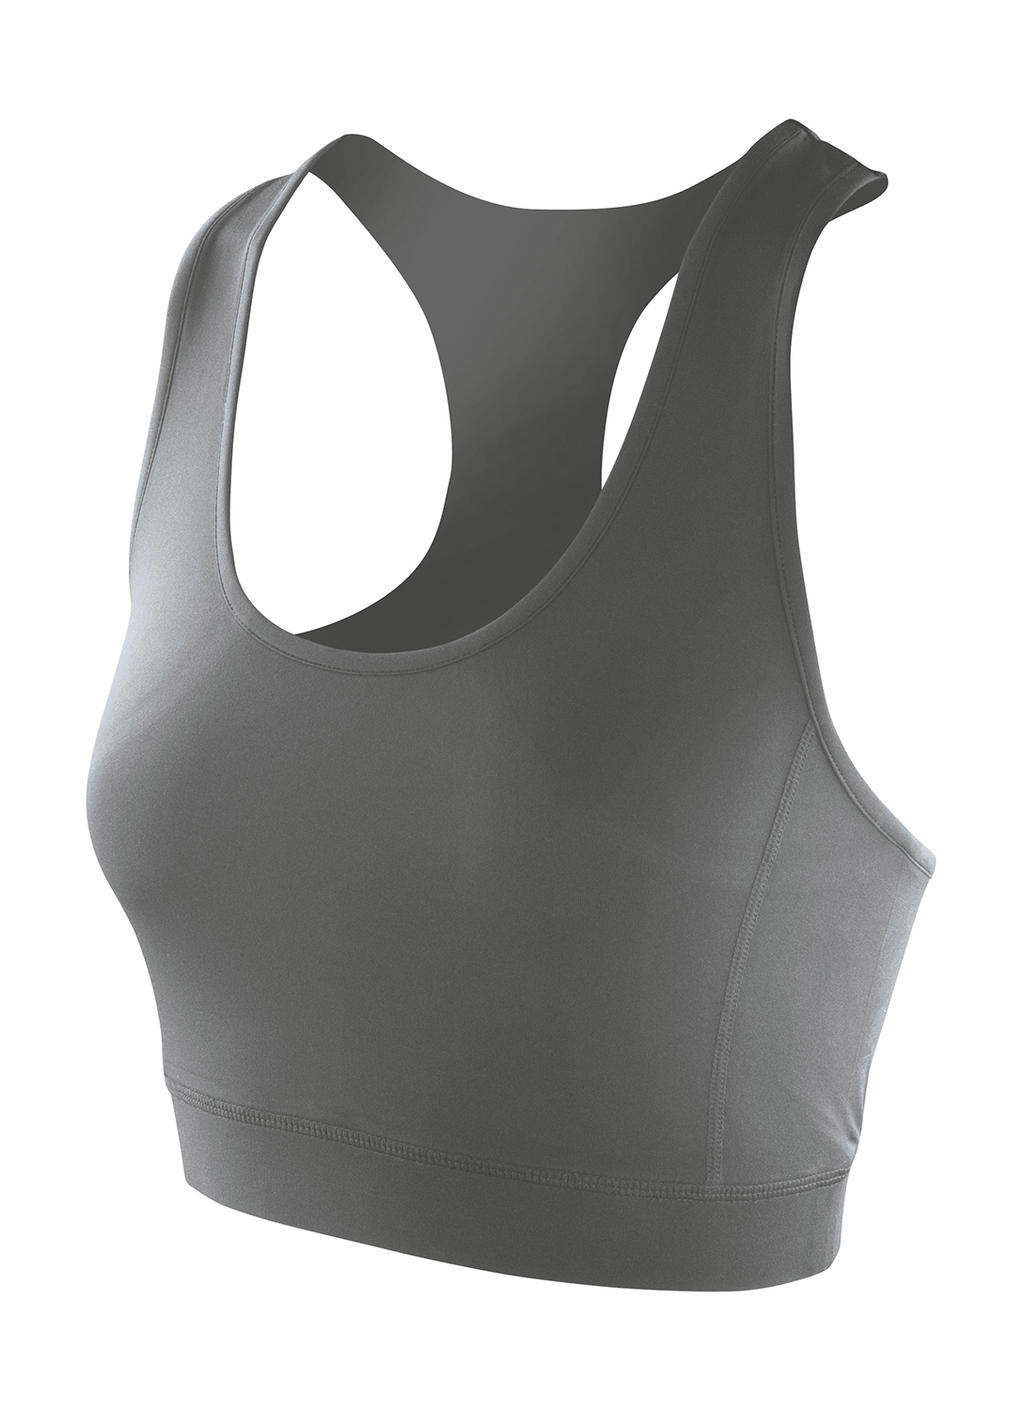  Womens Impact Softex? Crop Top in Farbe Cloudy Grey